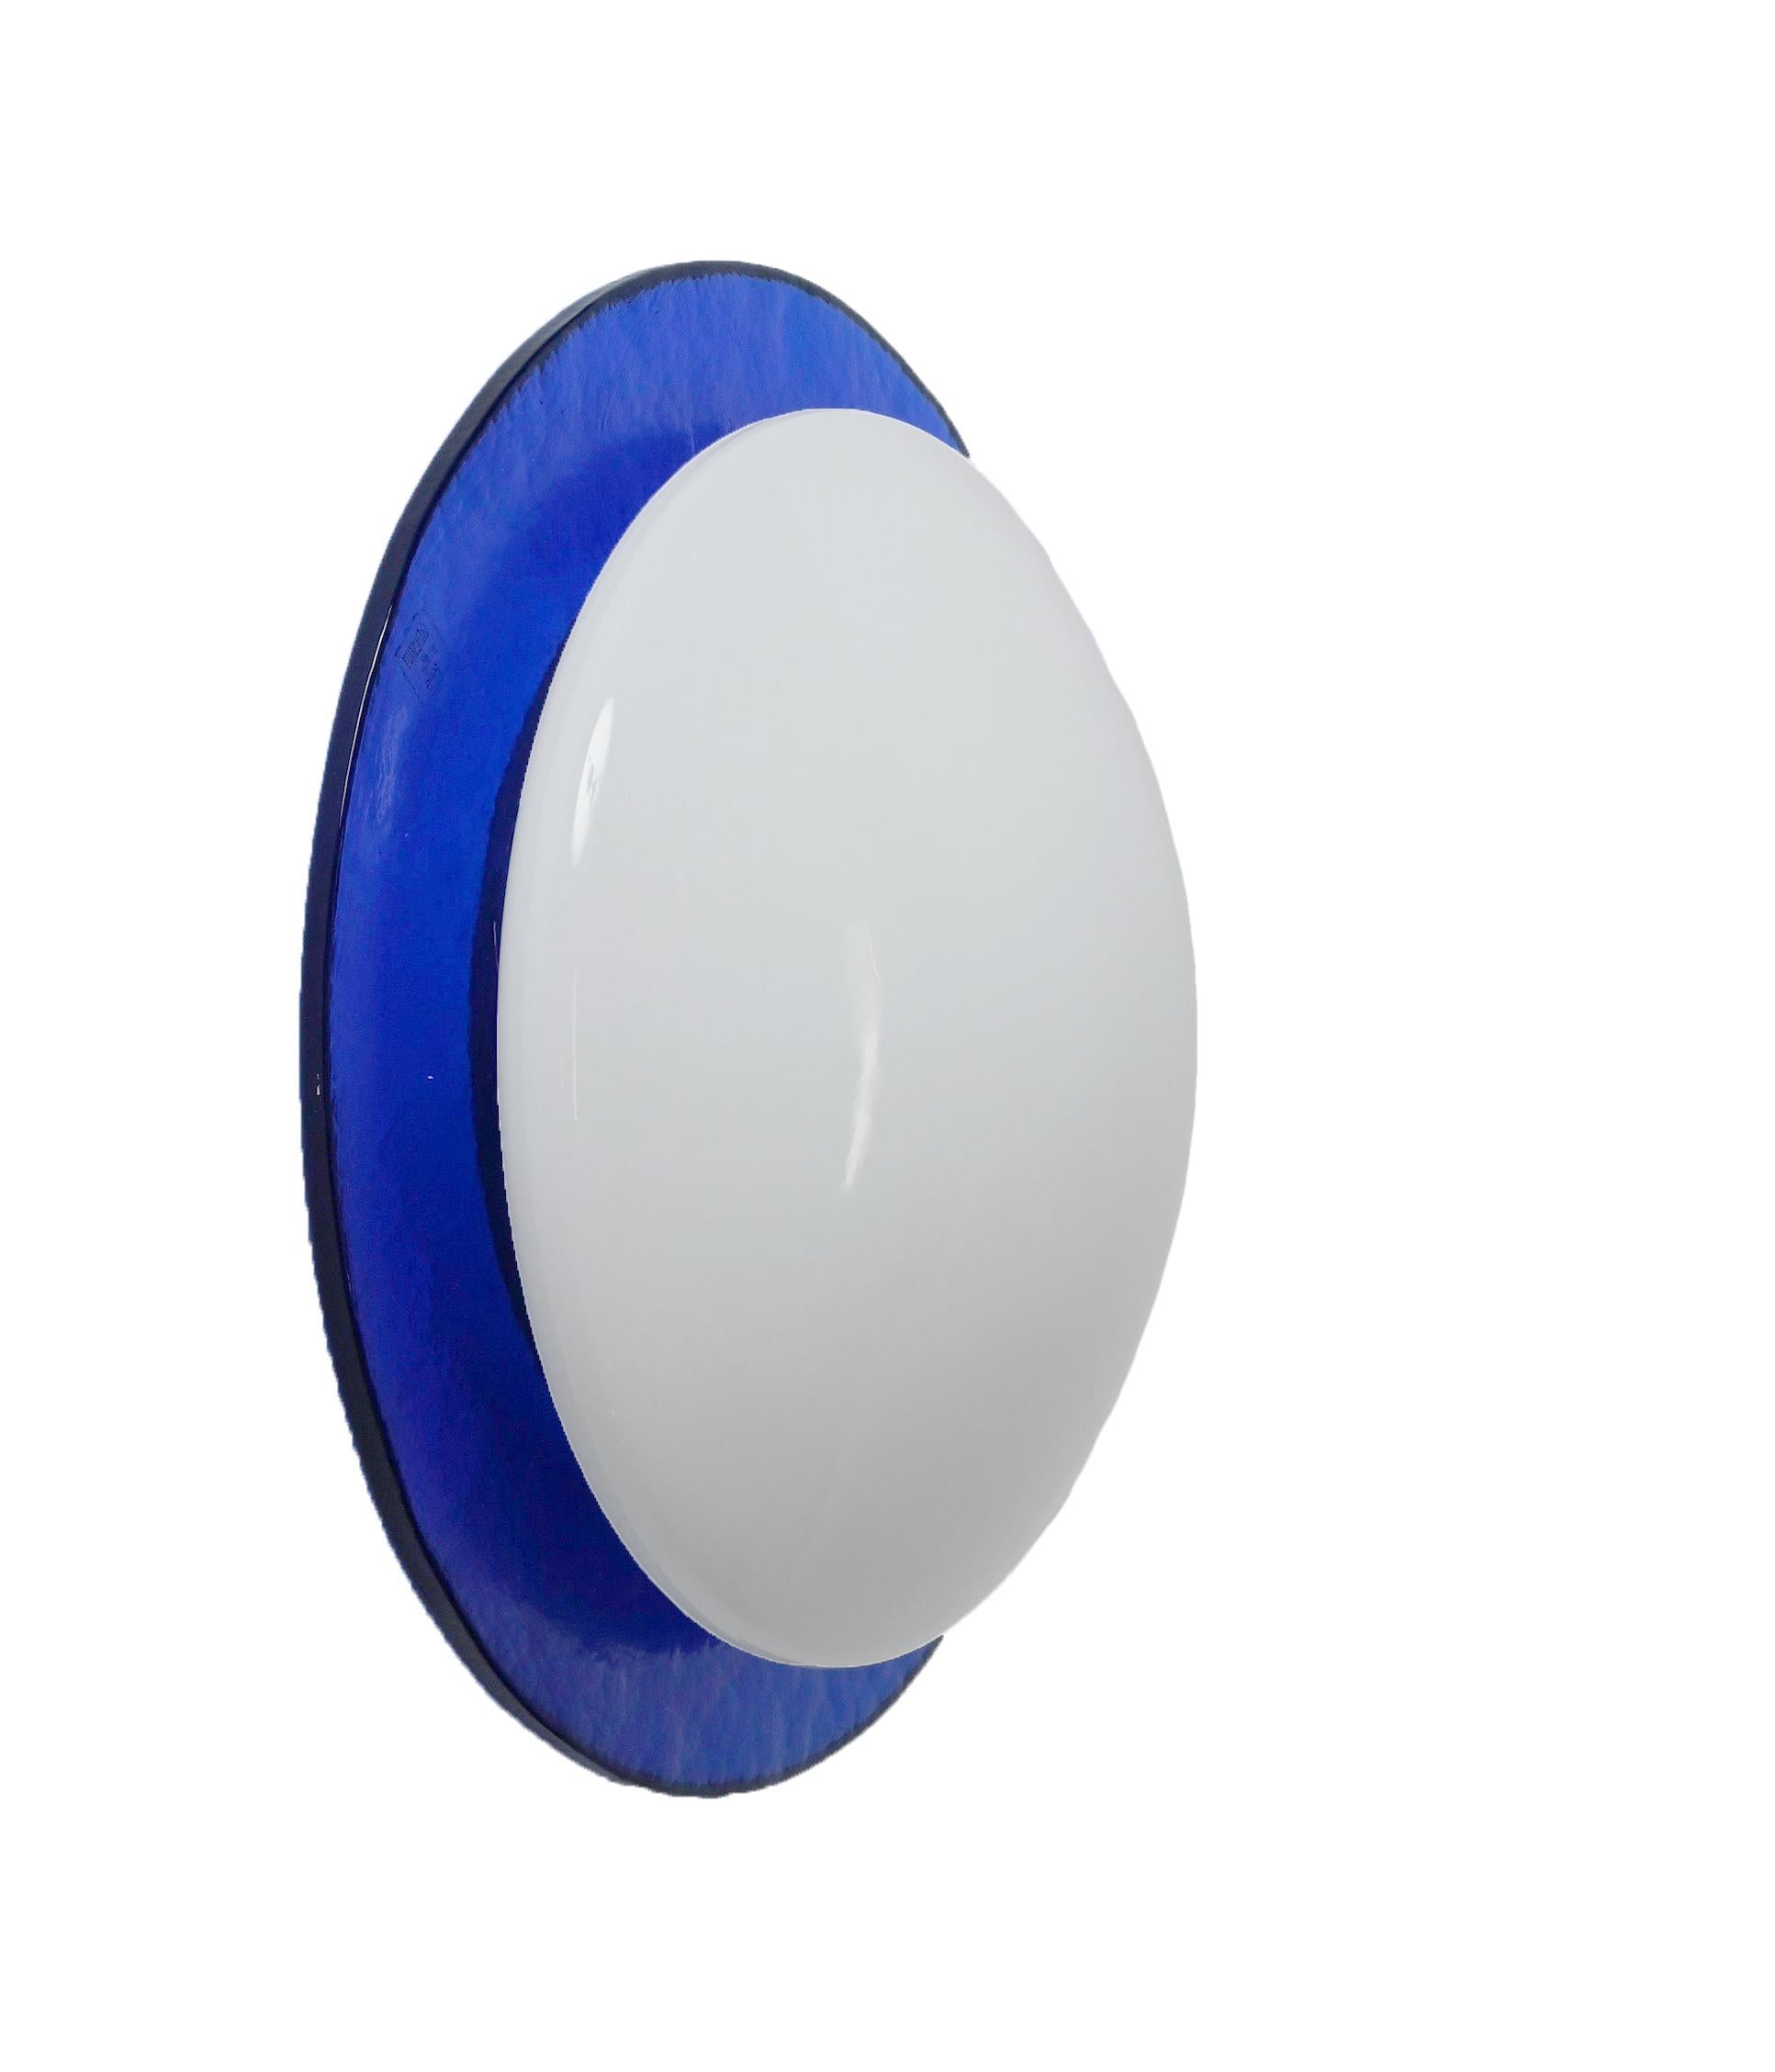 MIdcentury Vetri Murano Round Blue and White Artistic Glass Italian Sconce 1970s For Sale 9